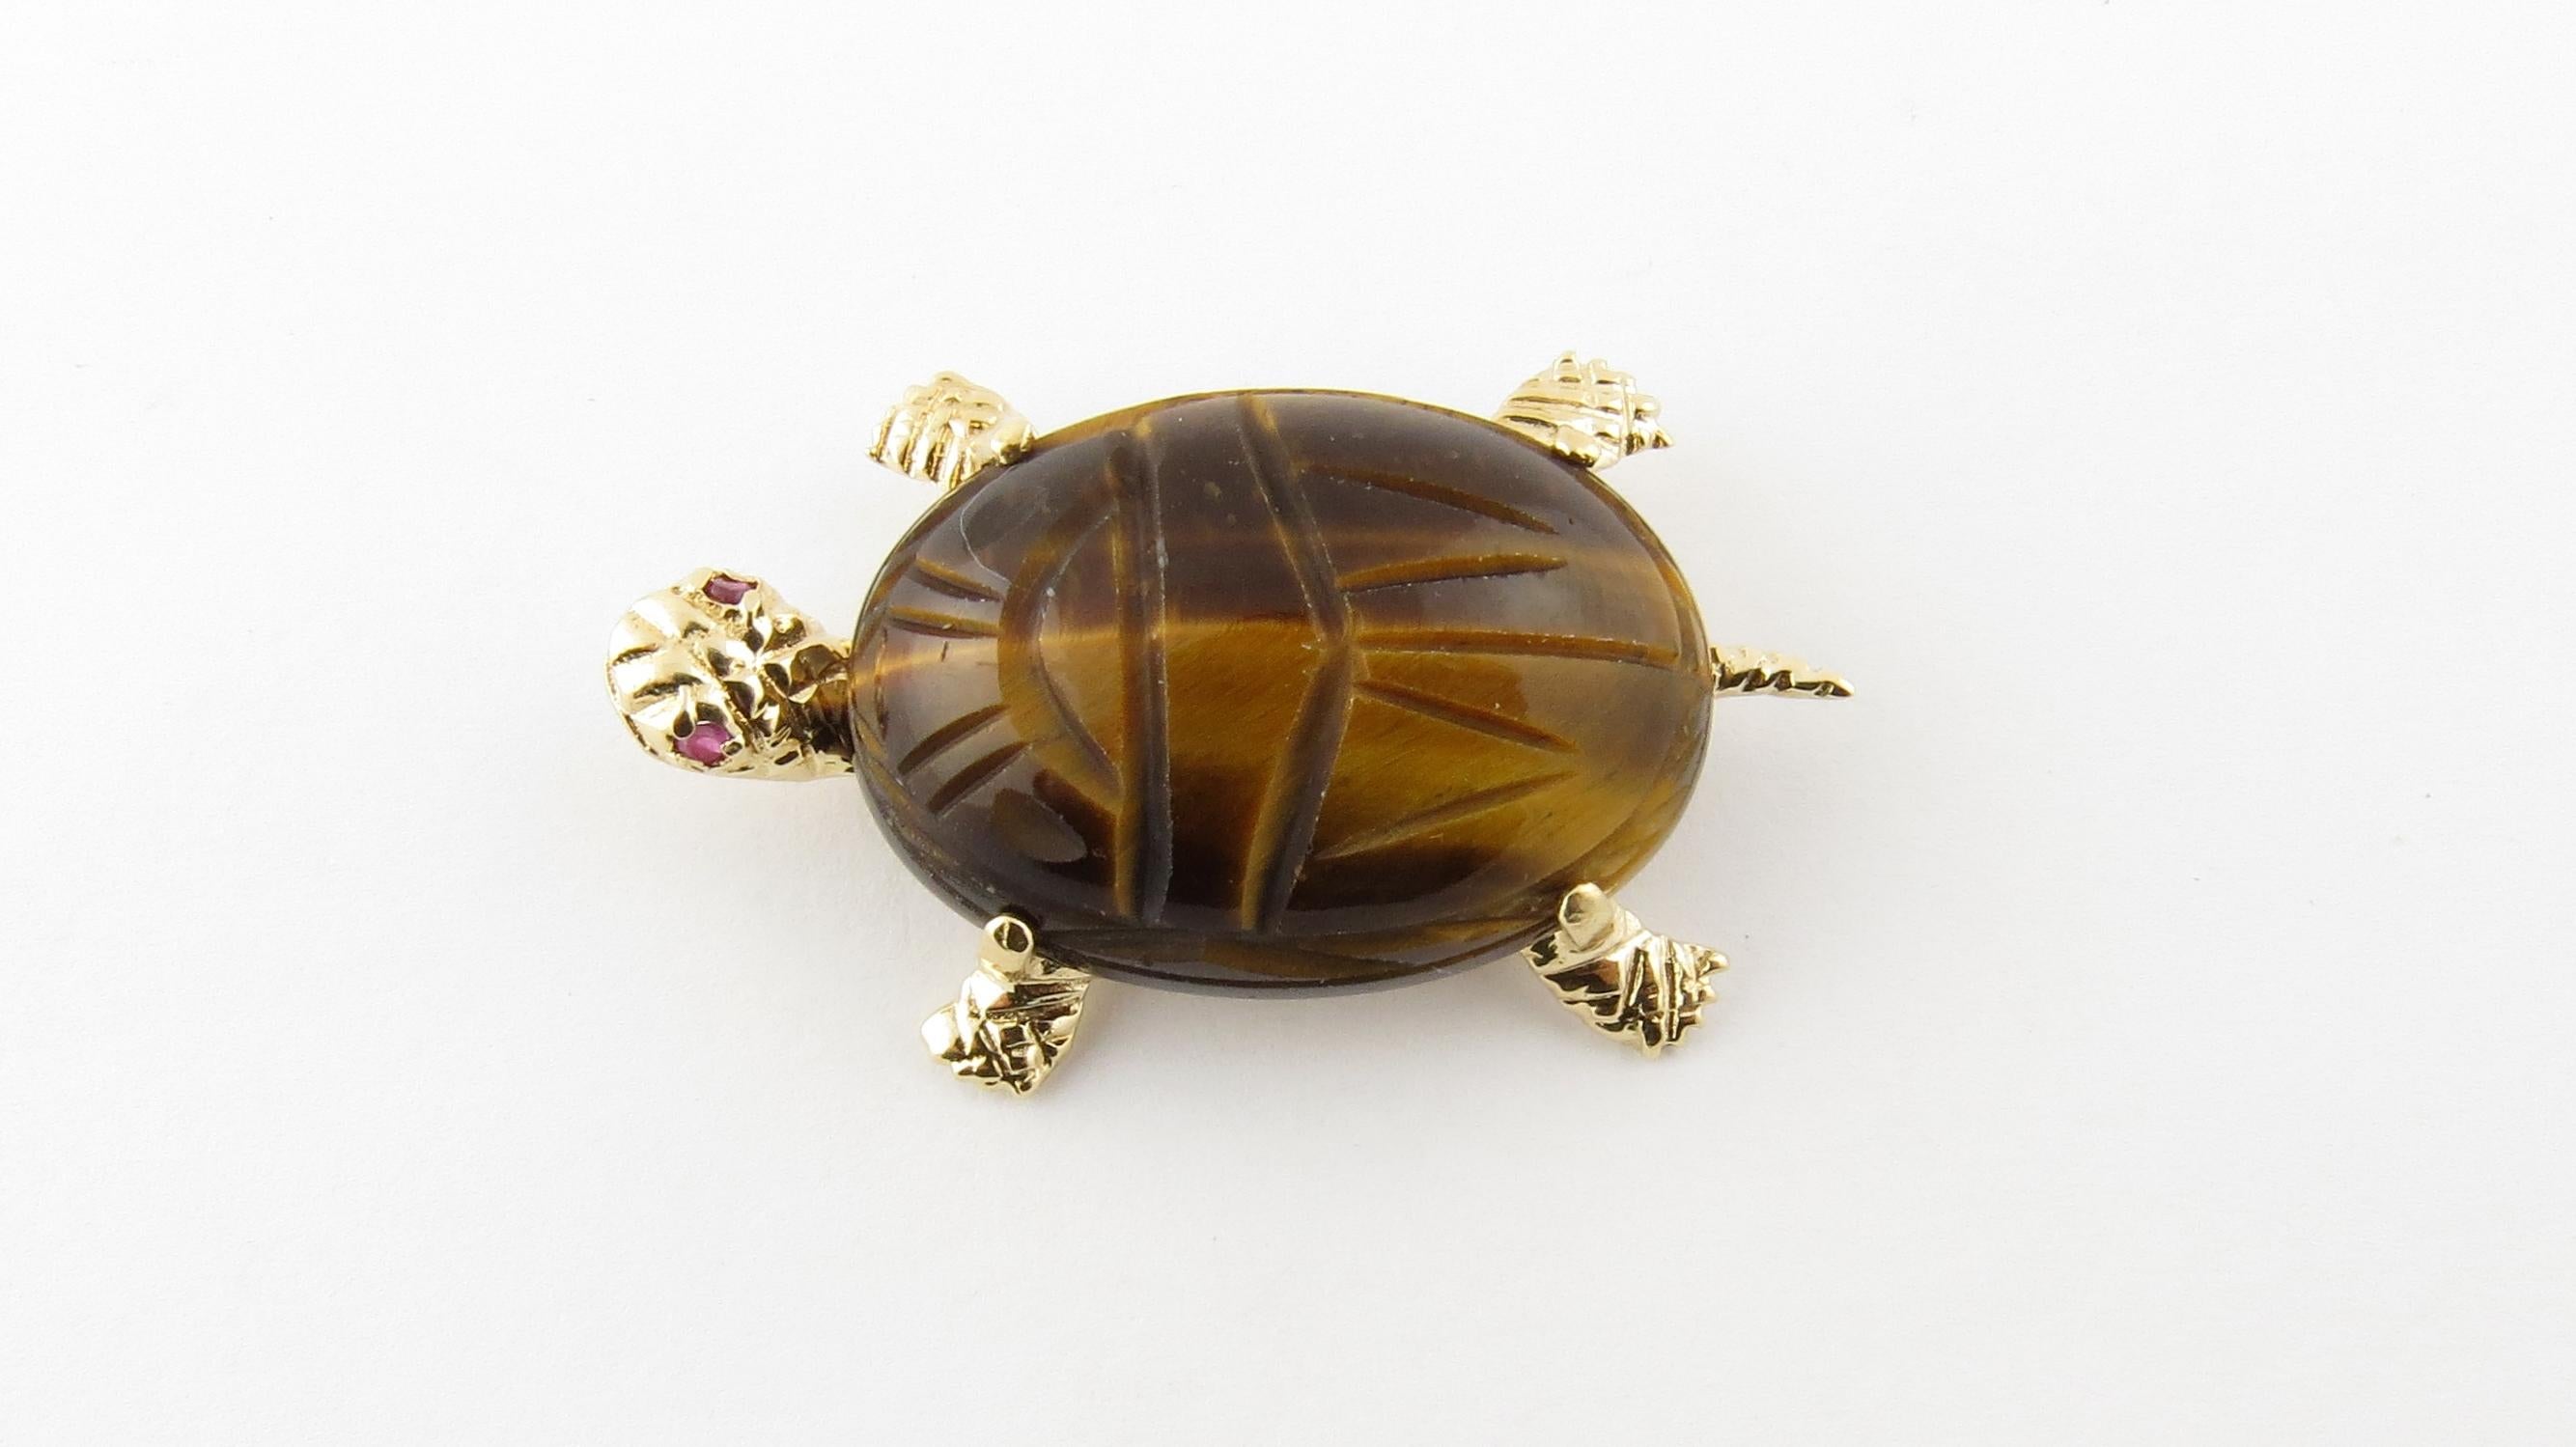 Vintage 14 Karat Yellow Gold Tiger's Eye and Ruby Turtle Brooch / Pin

This lovely turtle brooch features one oval tiger's eye scarab (25 mm x 18 mm) and two genuine ruby eyes set in beautifully detailed 14K yellow gold.

Size: 36 mm x 22